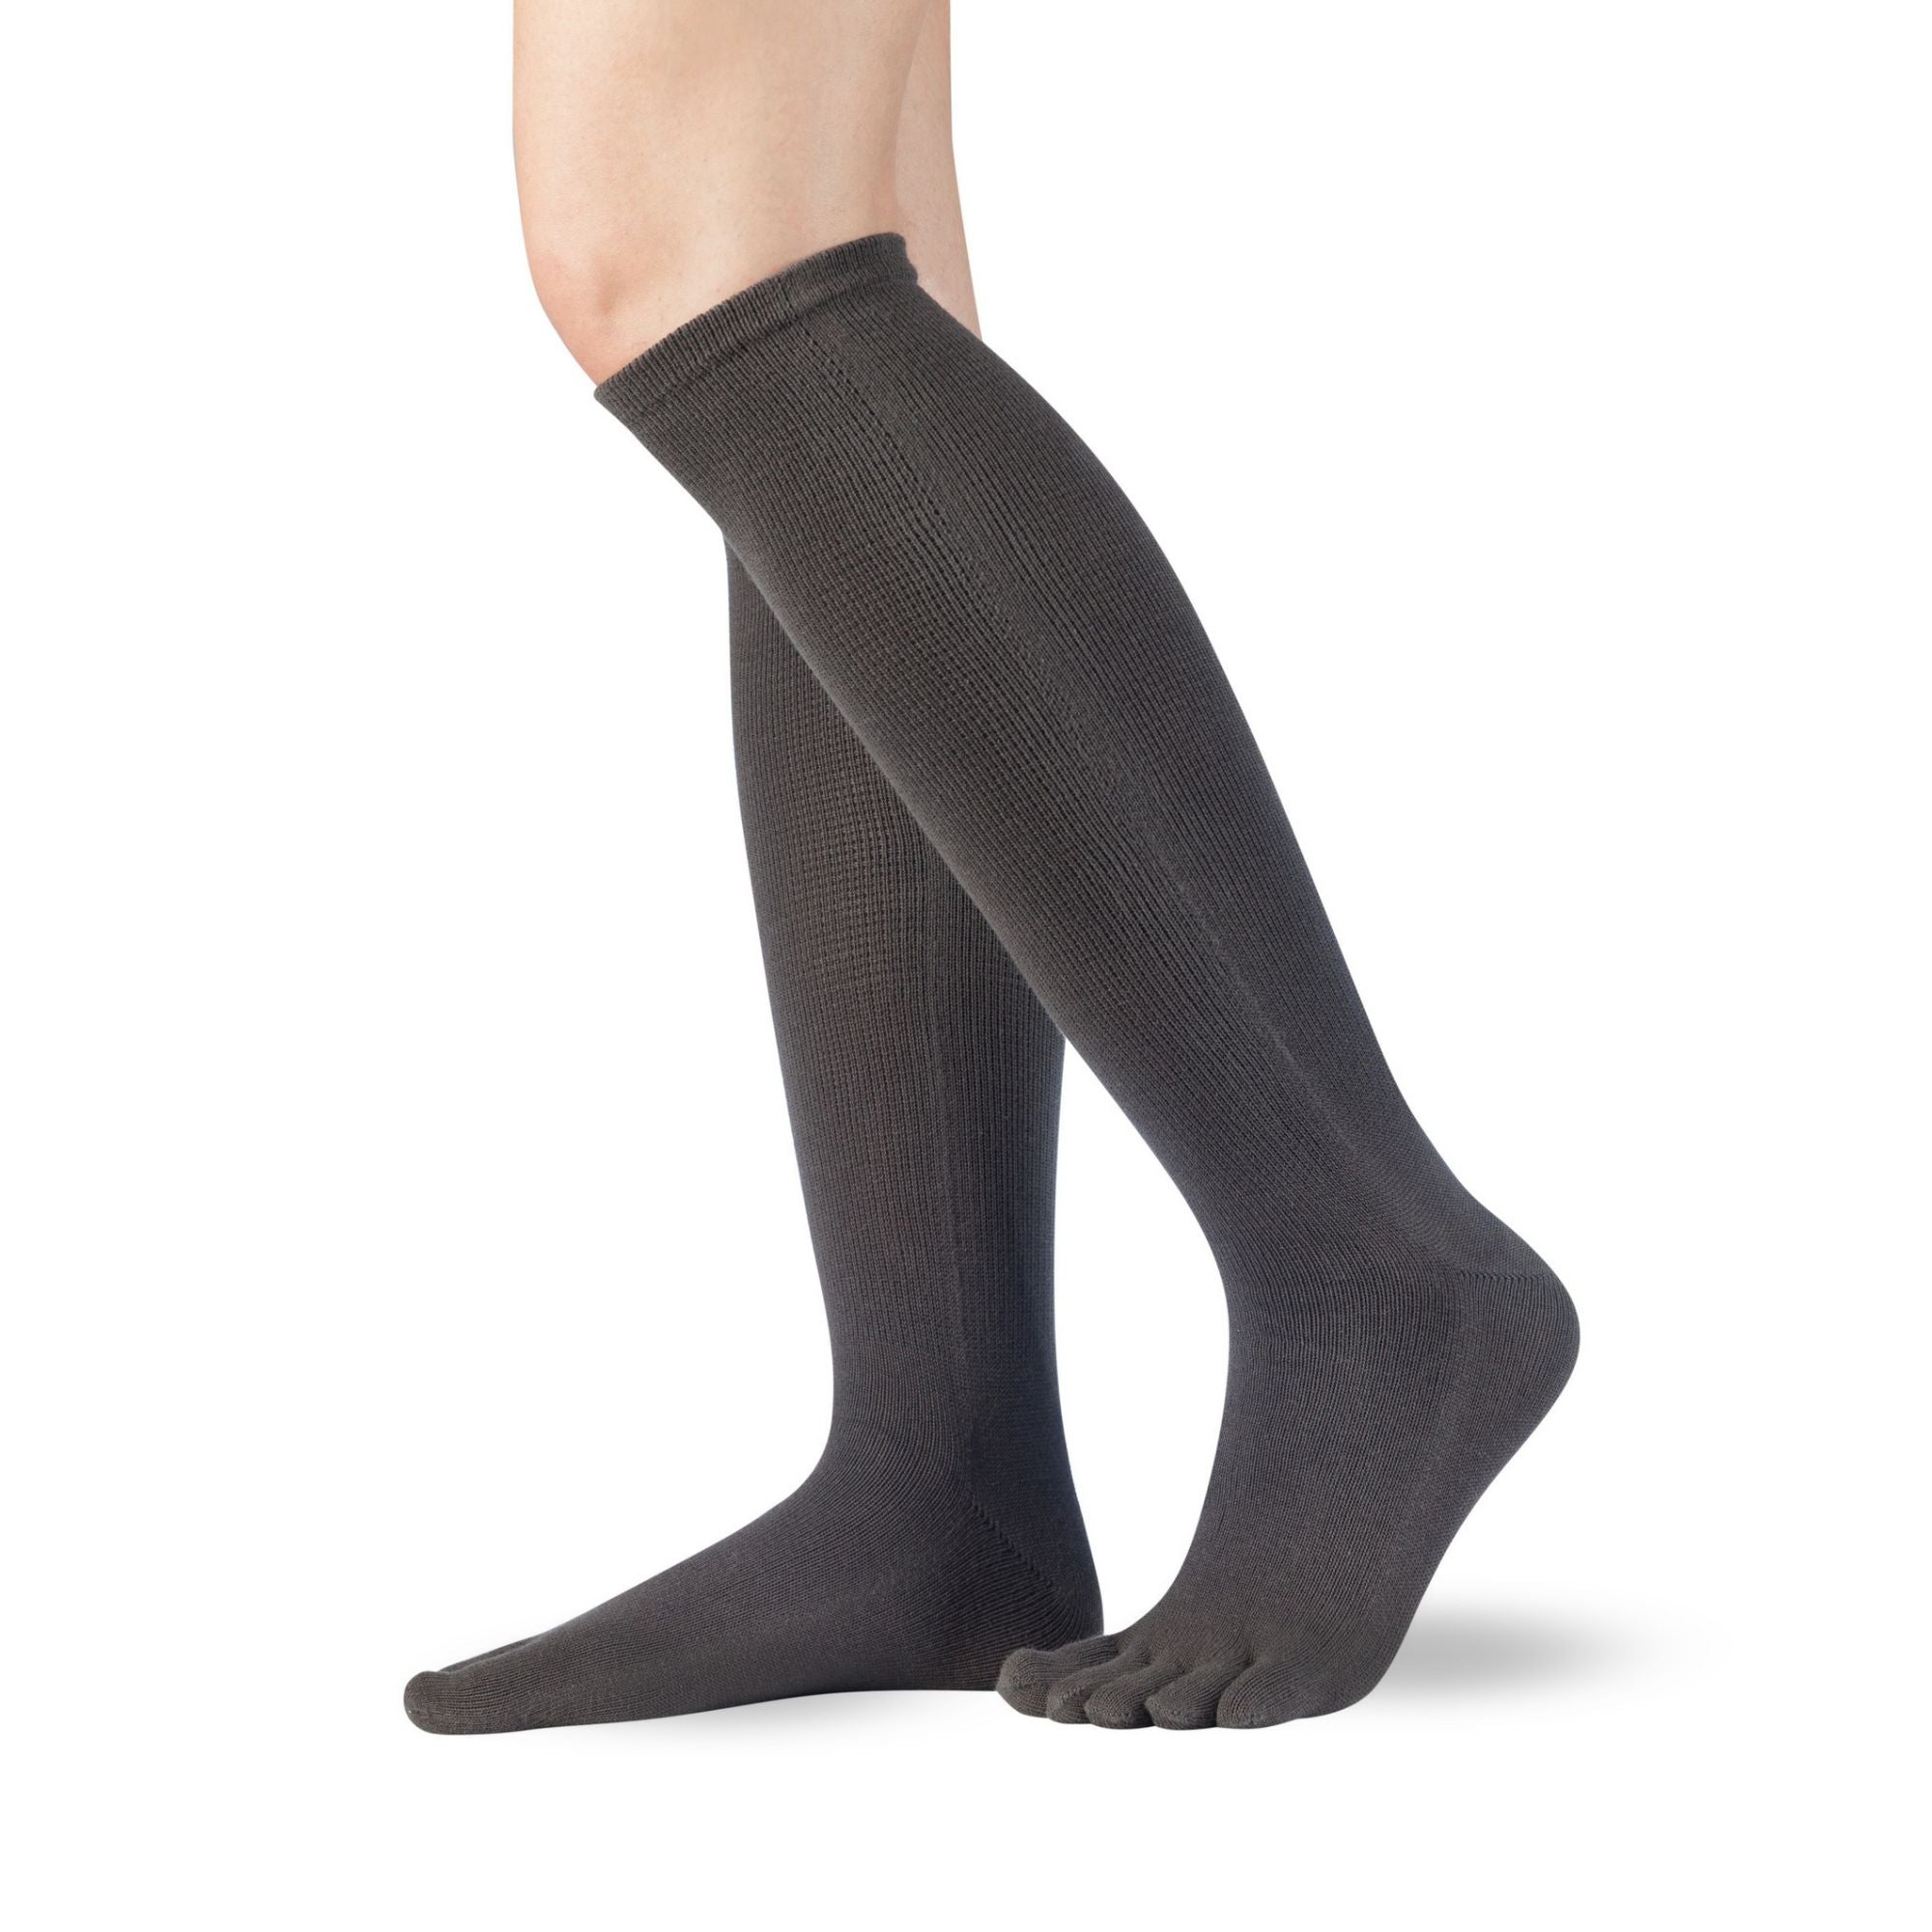 Knitido Essentials toe stockings (cotton) knee-length from the side in gray